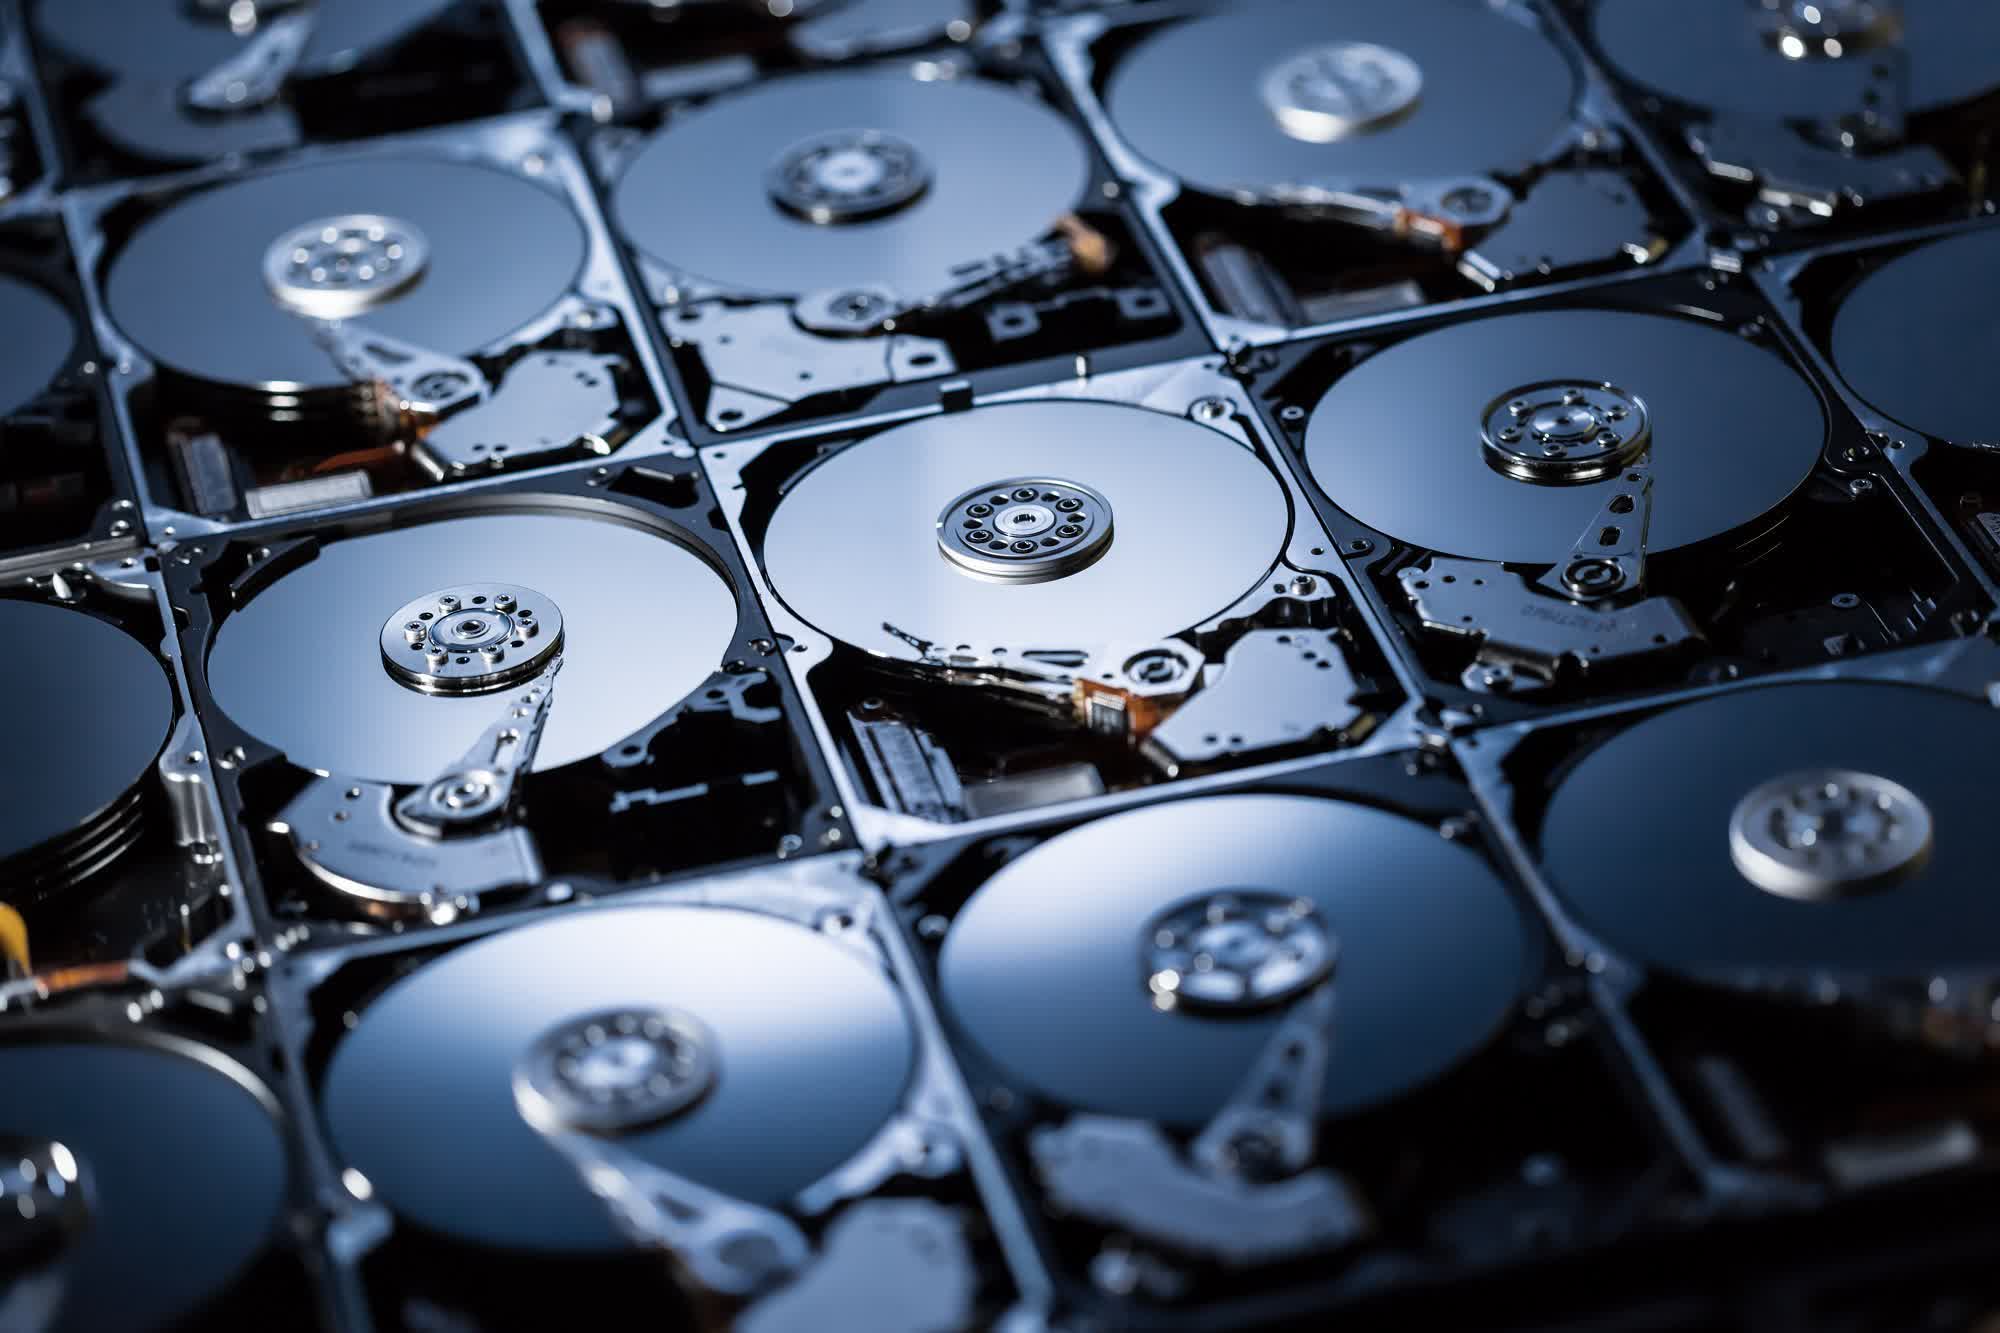 Western Digital's 5400 RPM drives aren't what they seem